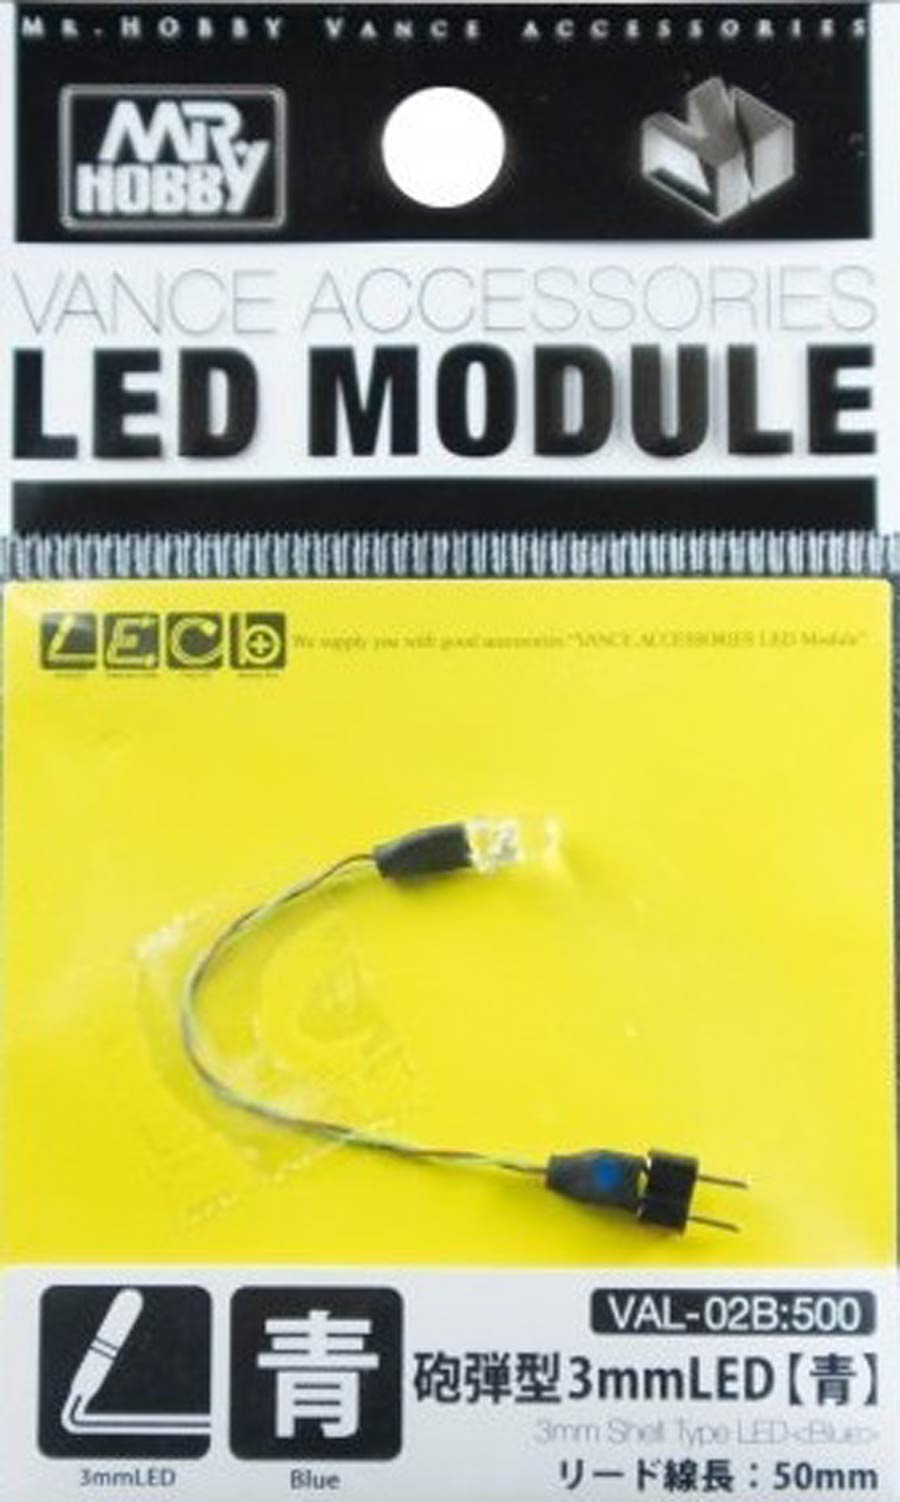 Mr. Hobby Vance Accessories LED Module - 3mm Shell Type LED (Blue)